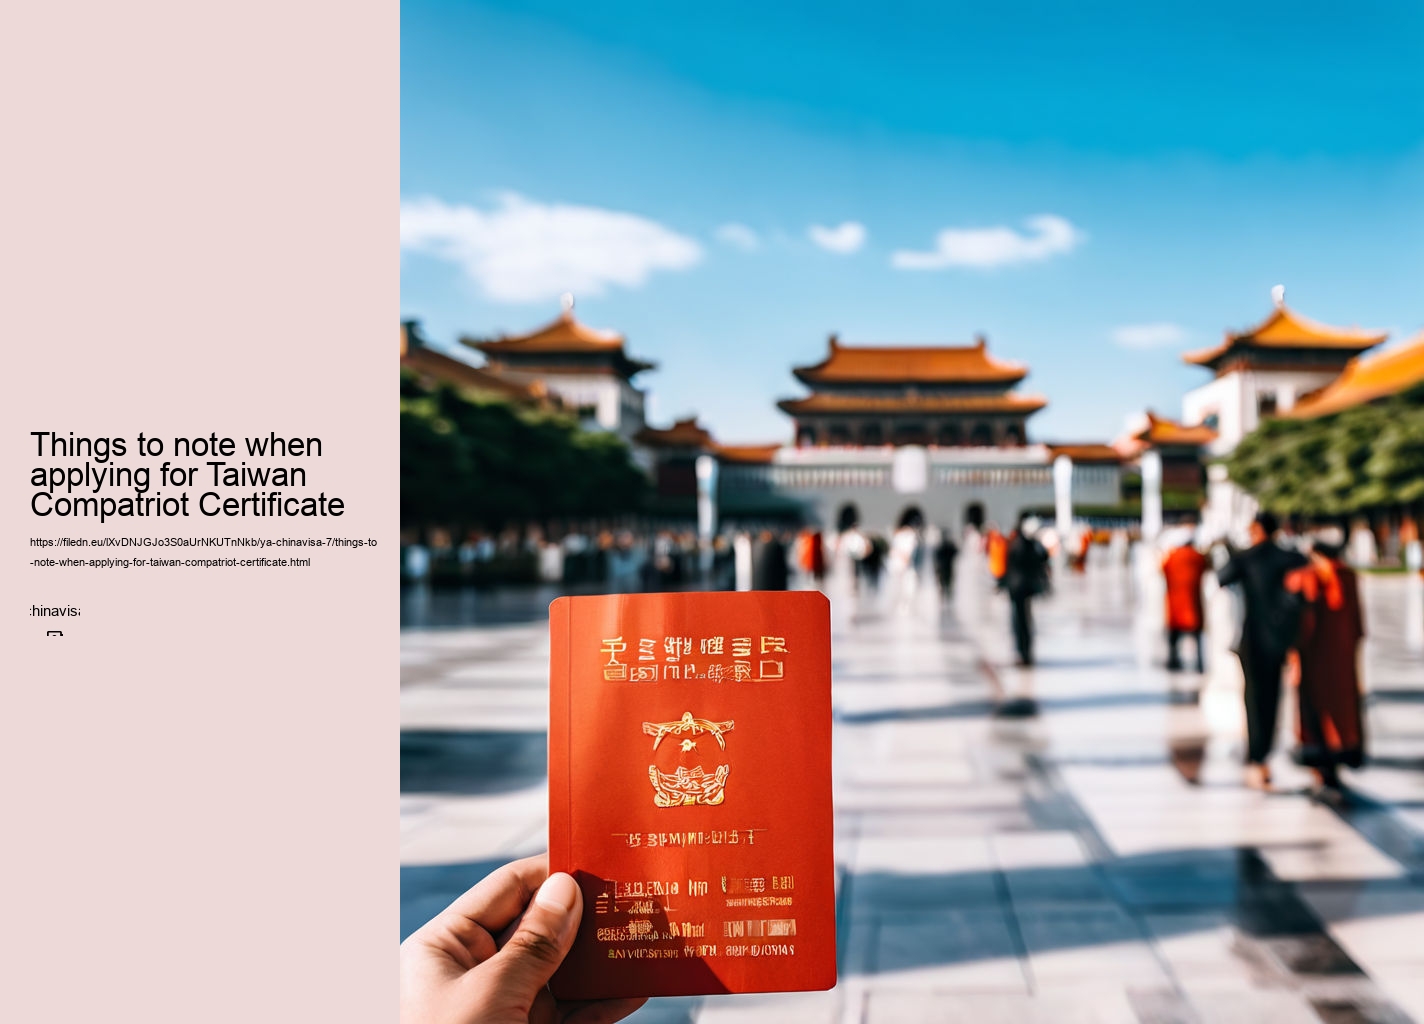 Things to note when applying for Taiwan Compatriot Certificate